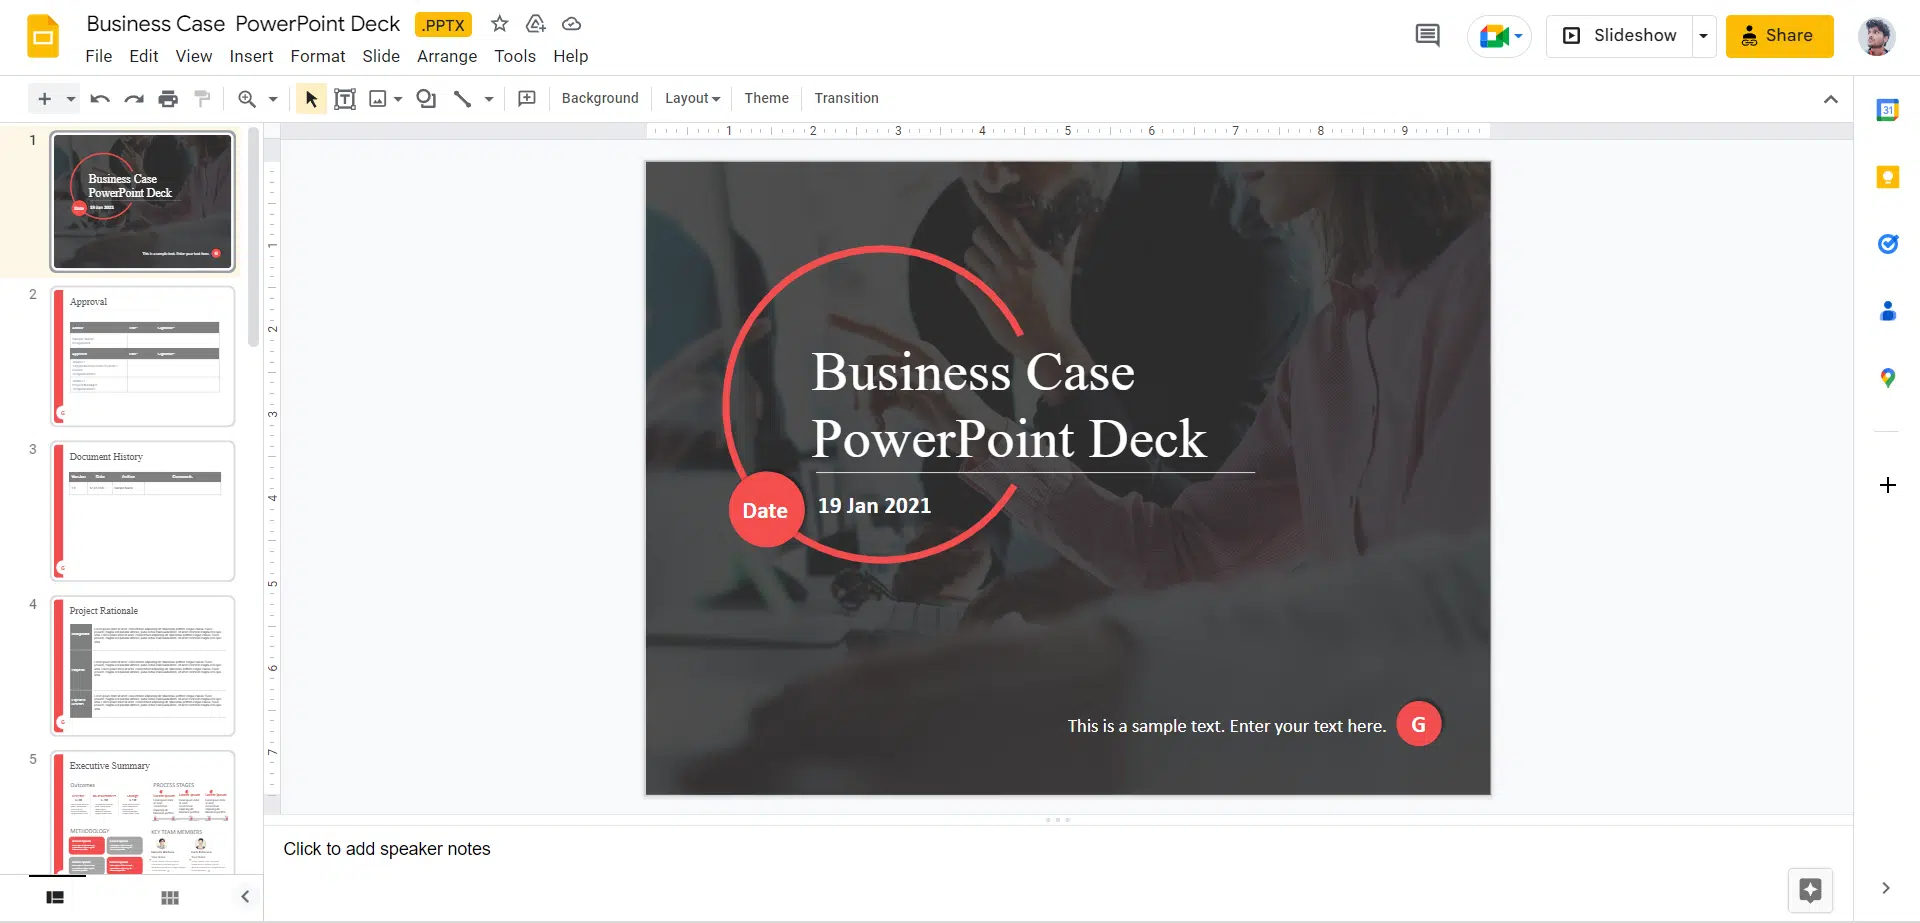 How to print notes in Google Slides